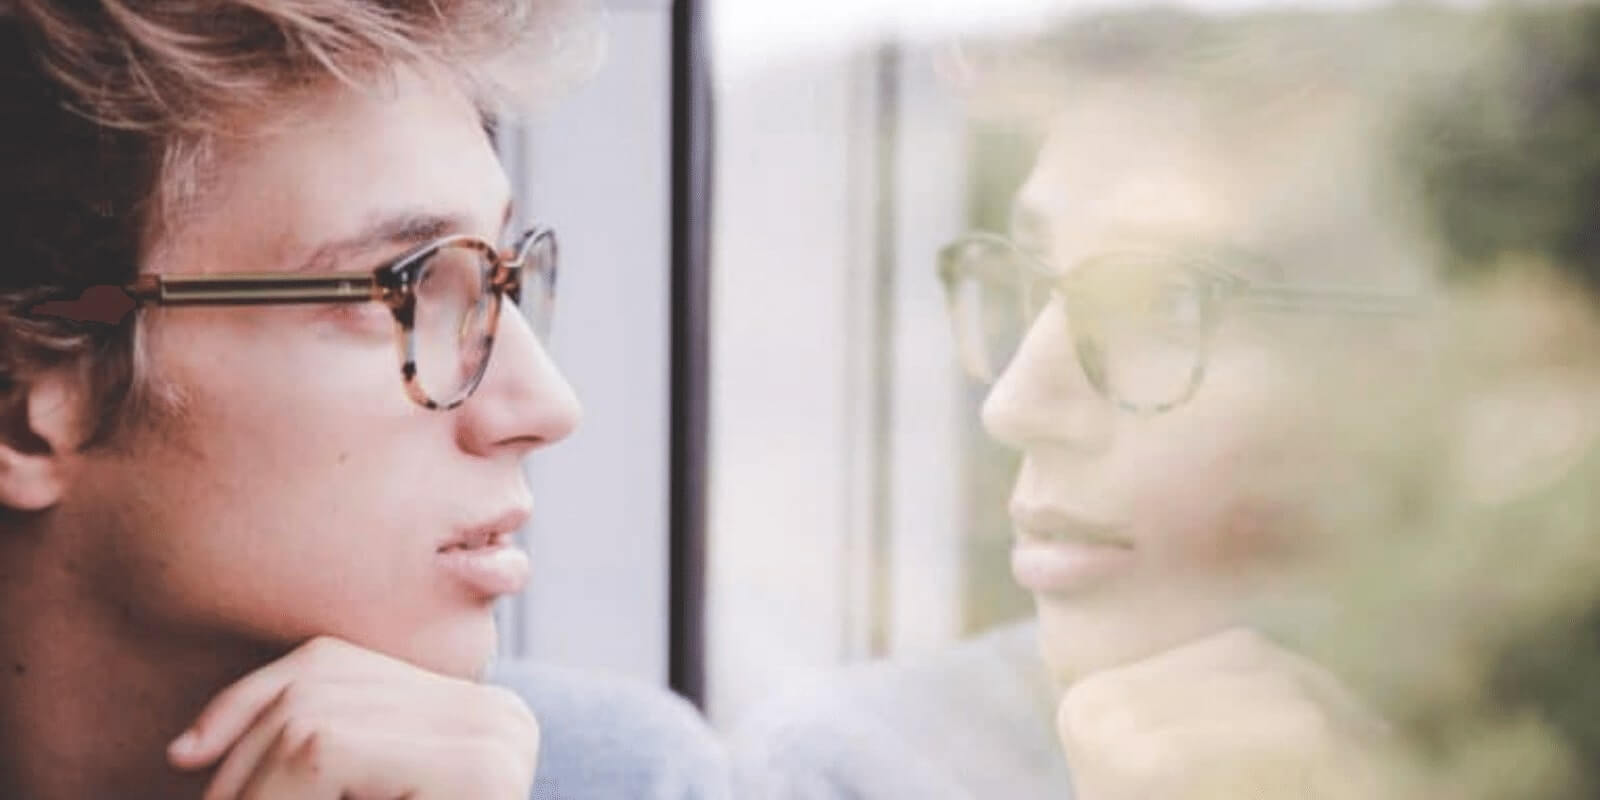 A teen boy with glasses looking at his reflection on a window